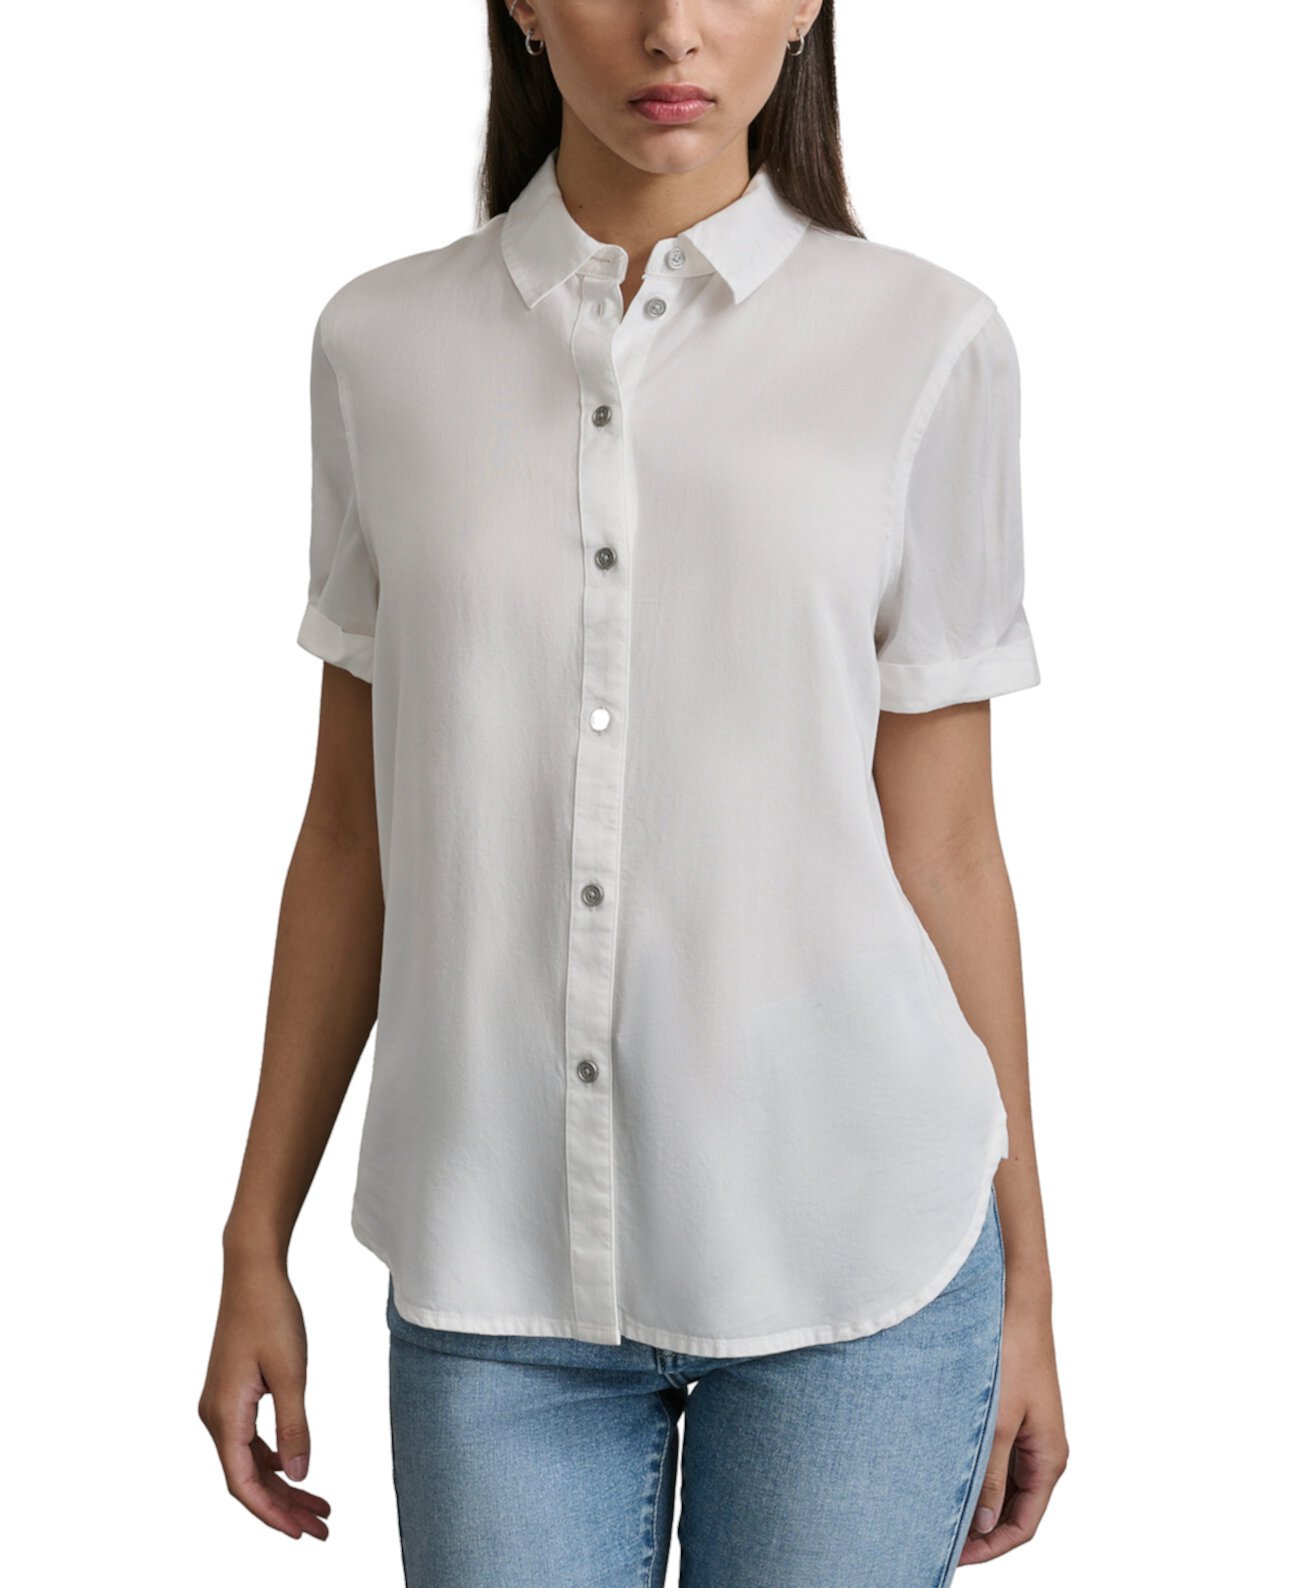 Women's Rolled-Sleeve Button-Up Shirt DKNY